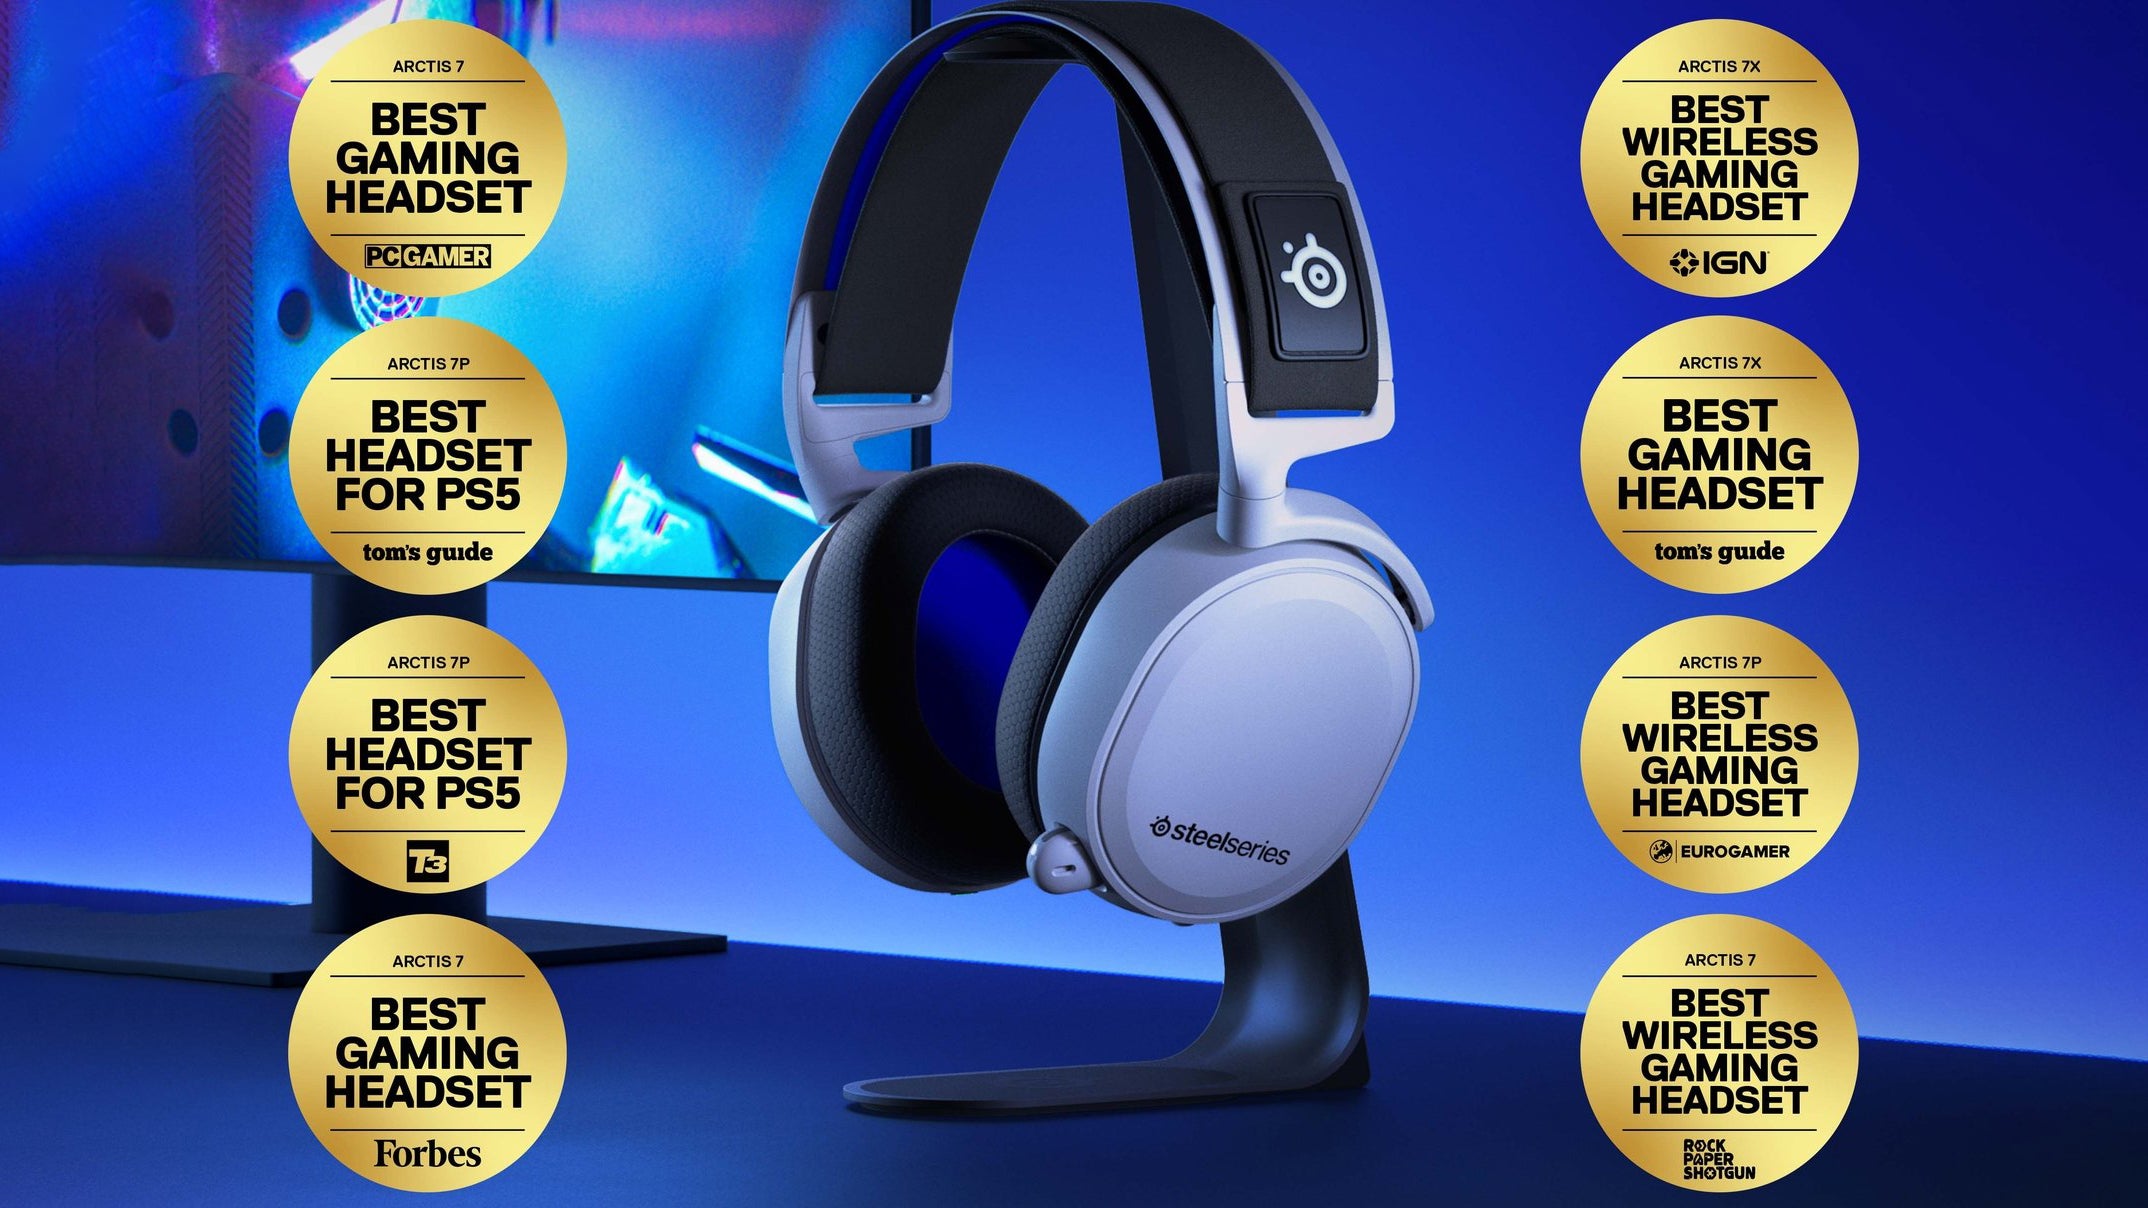 Get the brand new SteelSeries Arctis 7P+ gaming headset for 12